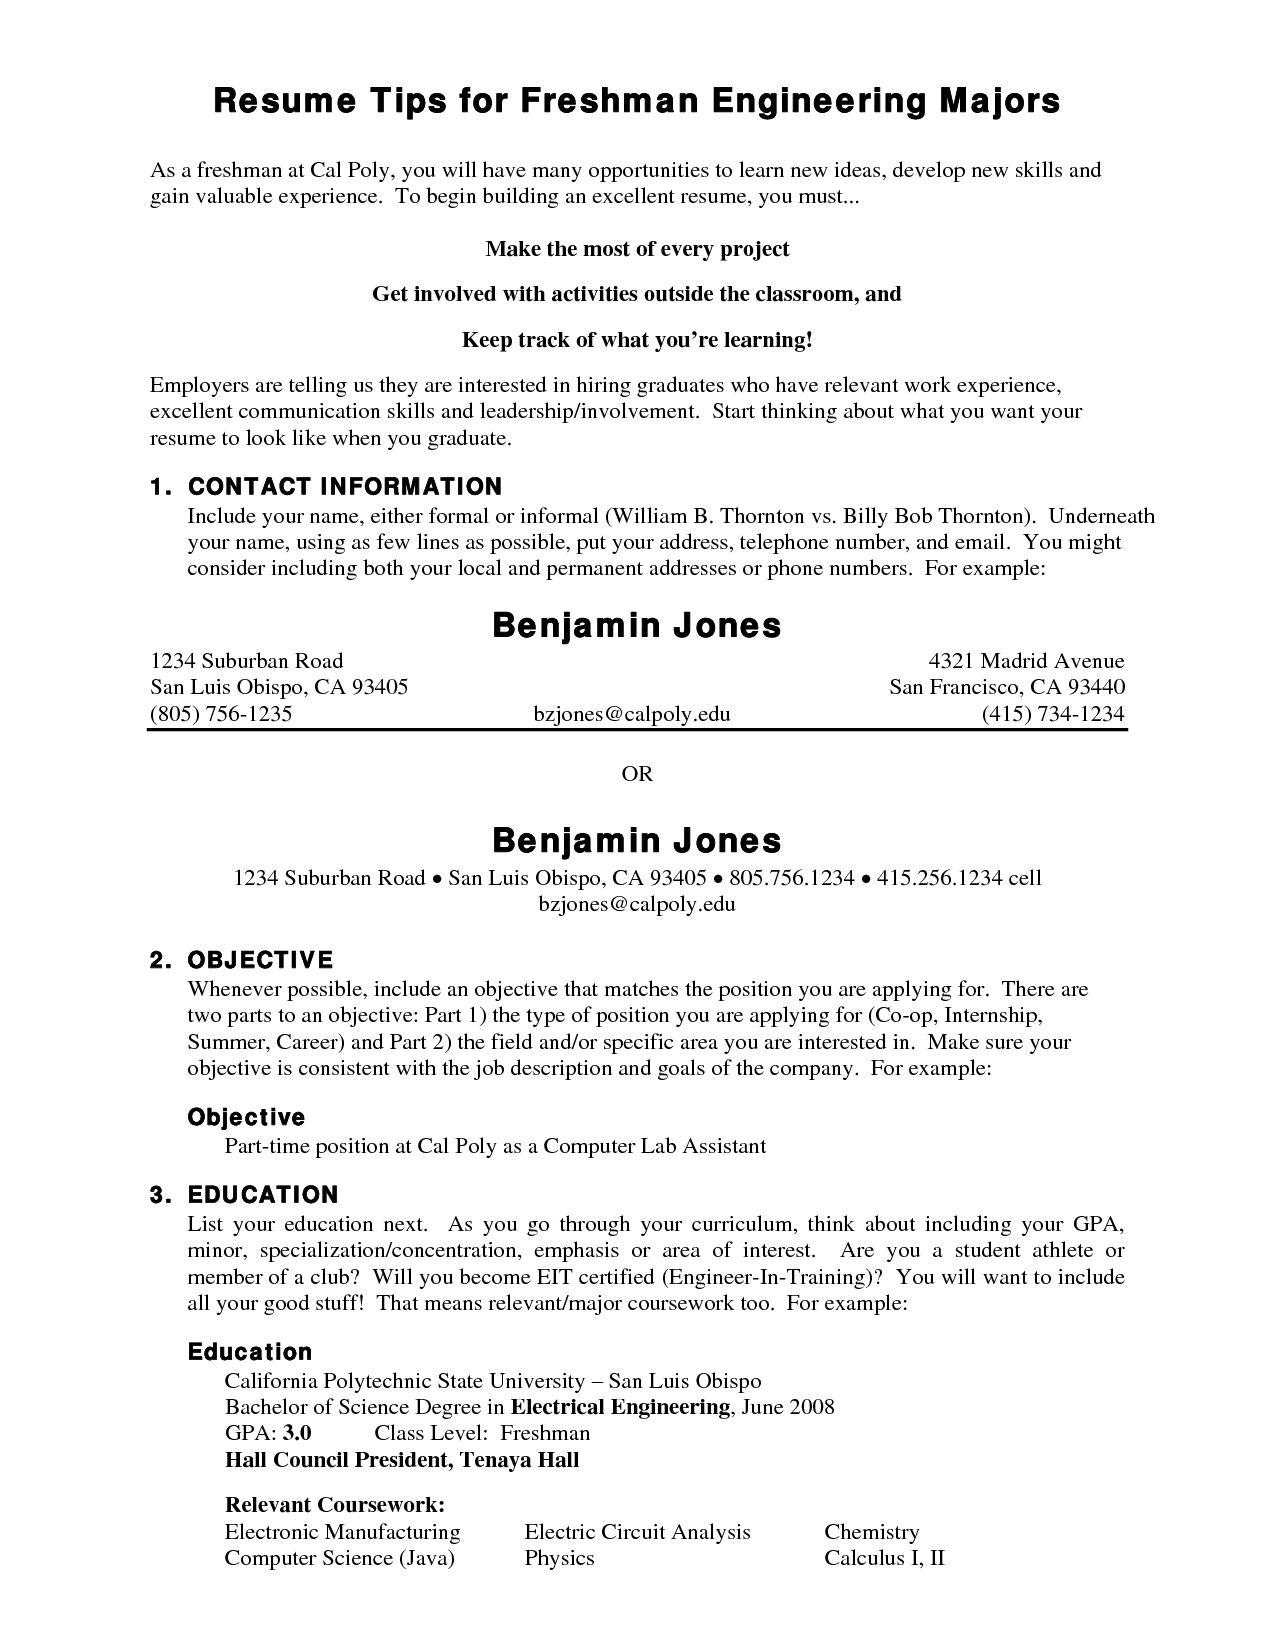 Sample Resume for Student Summer Job 10 Most Popular Summer Job Ideas for College Students 2020